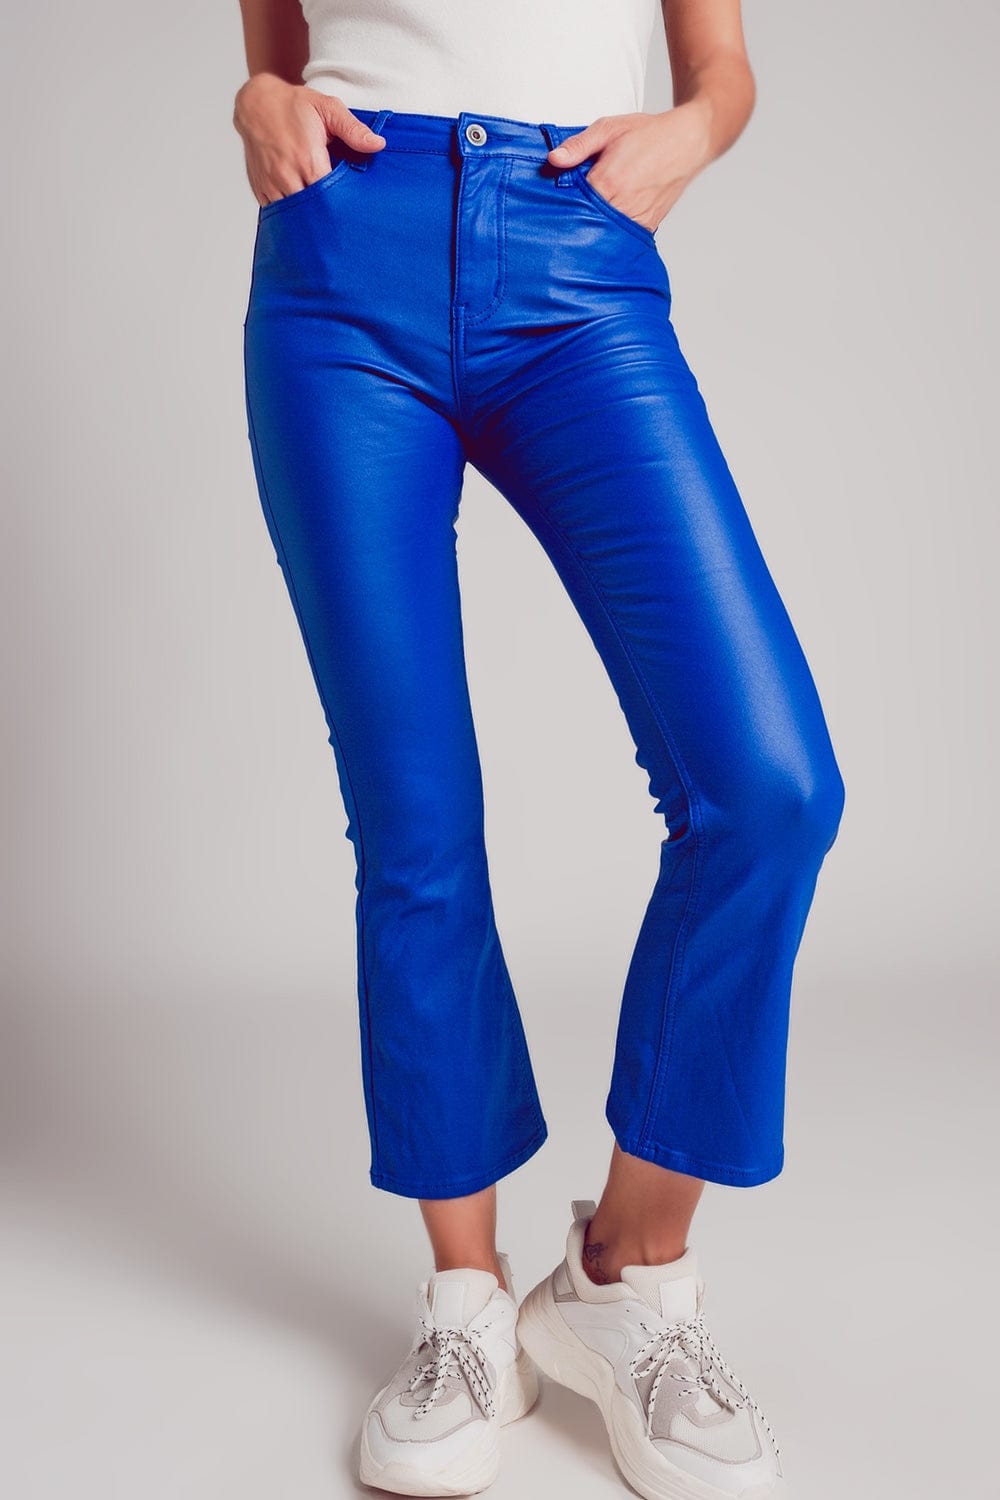 Stretch faux leather flare pants in blue - Himelhoch's Department